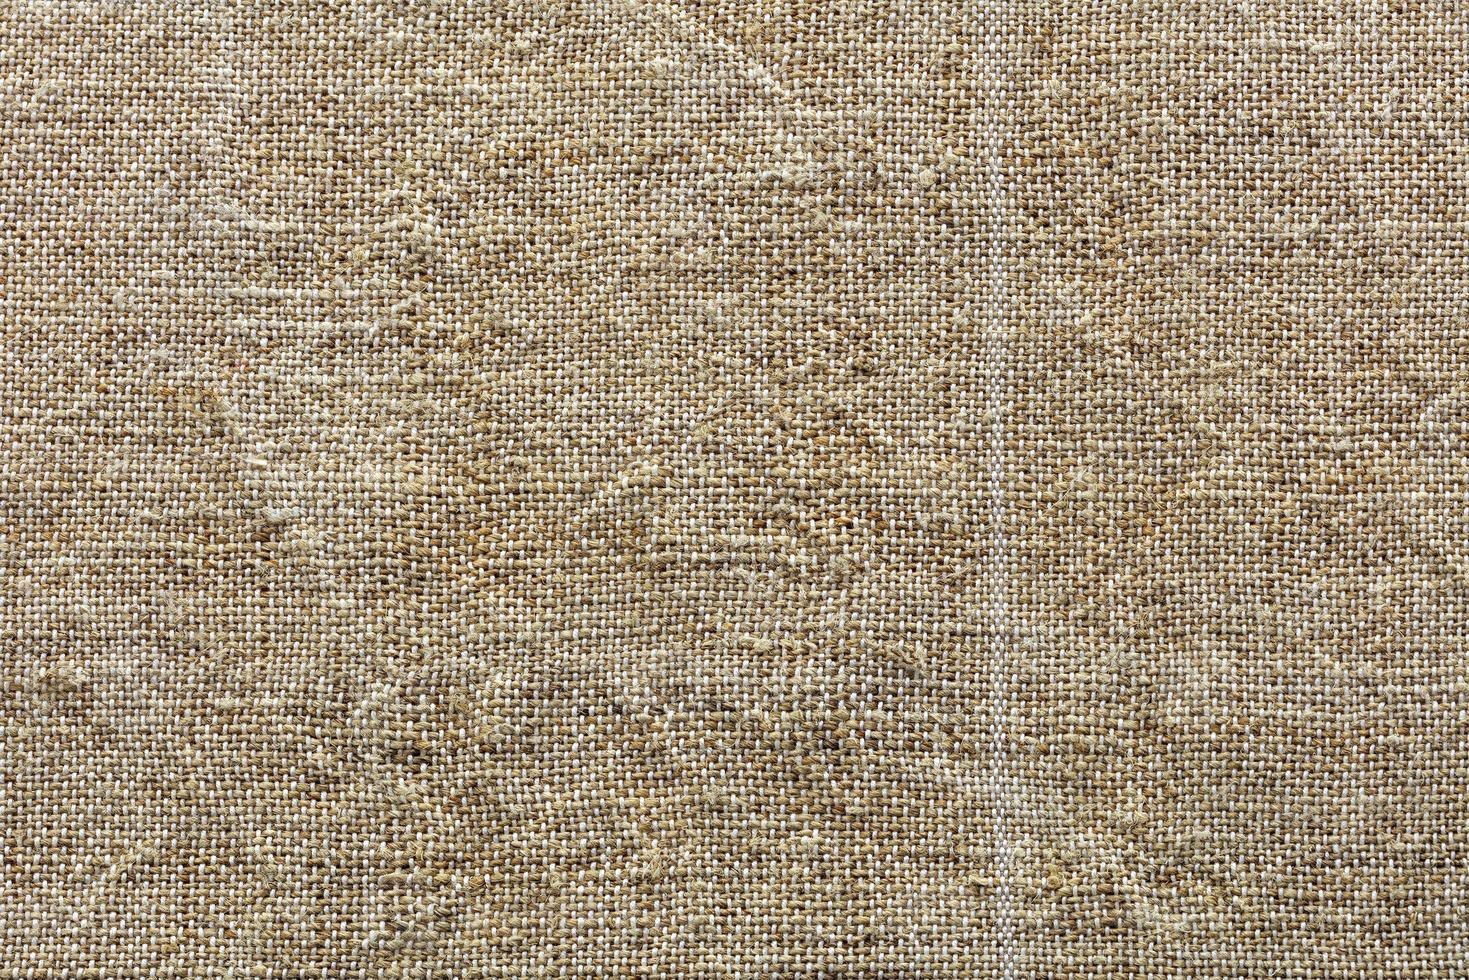 Background and texture of weave of eco-friendly old rough hemp photo